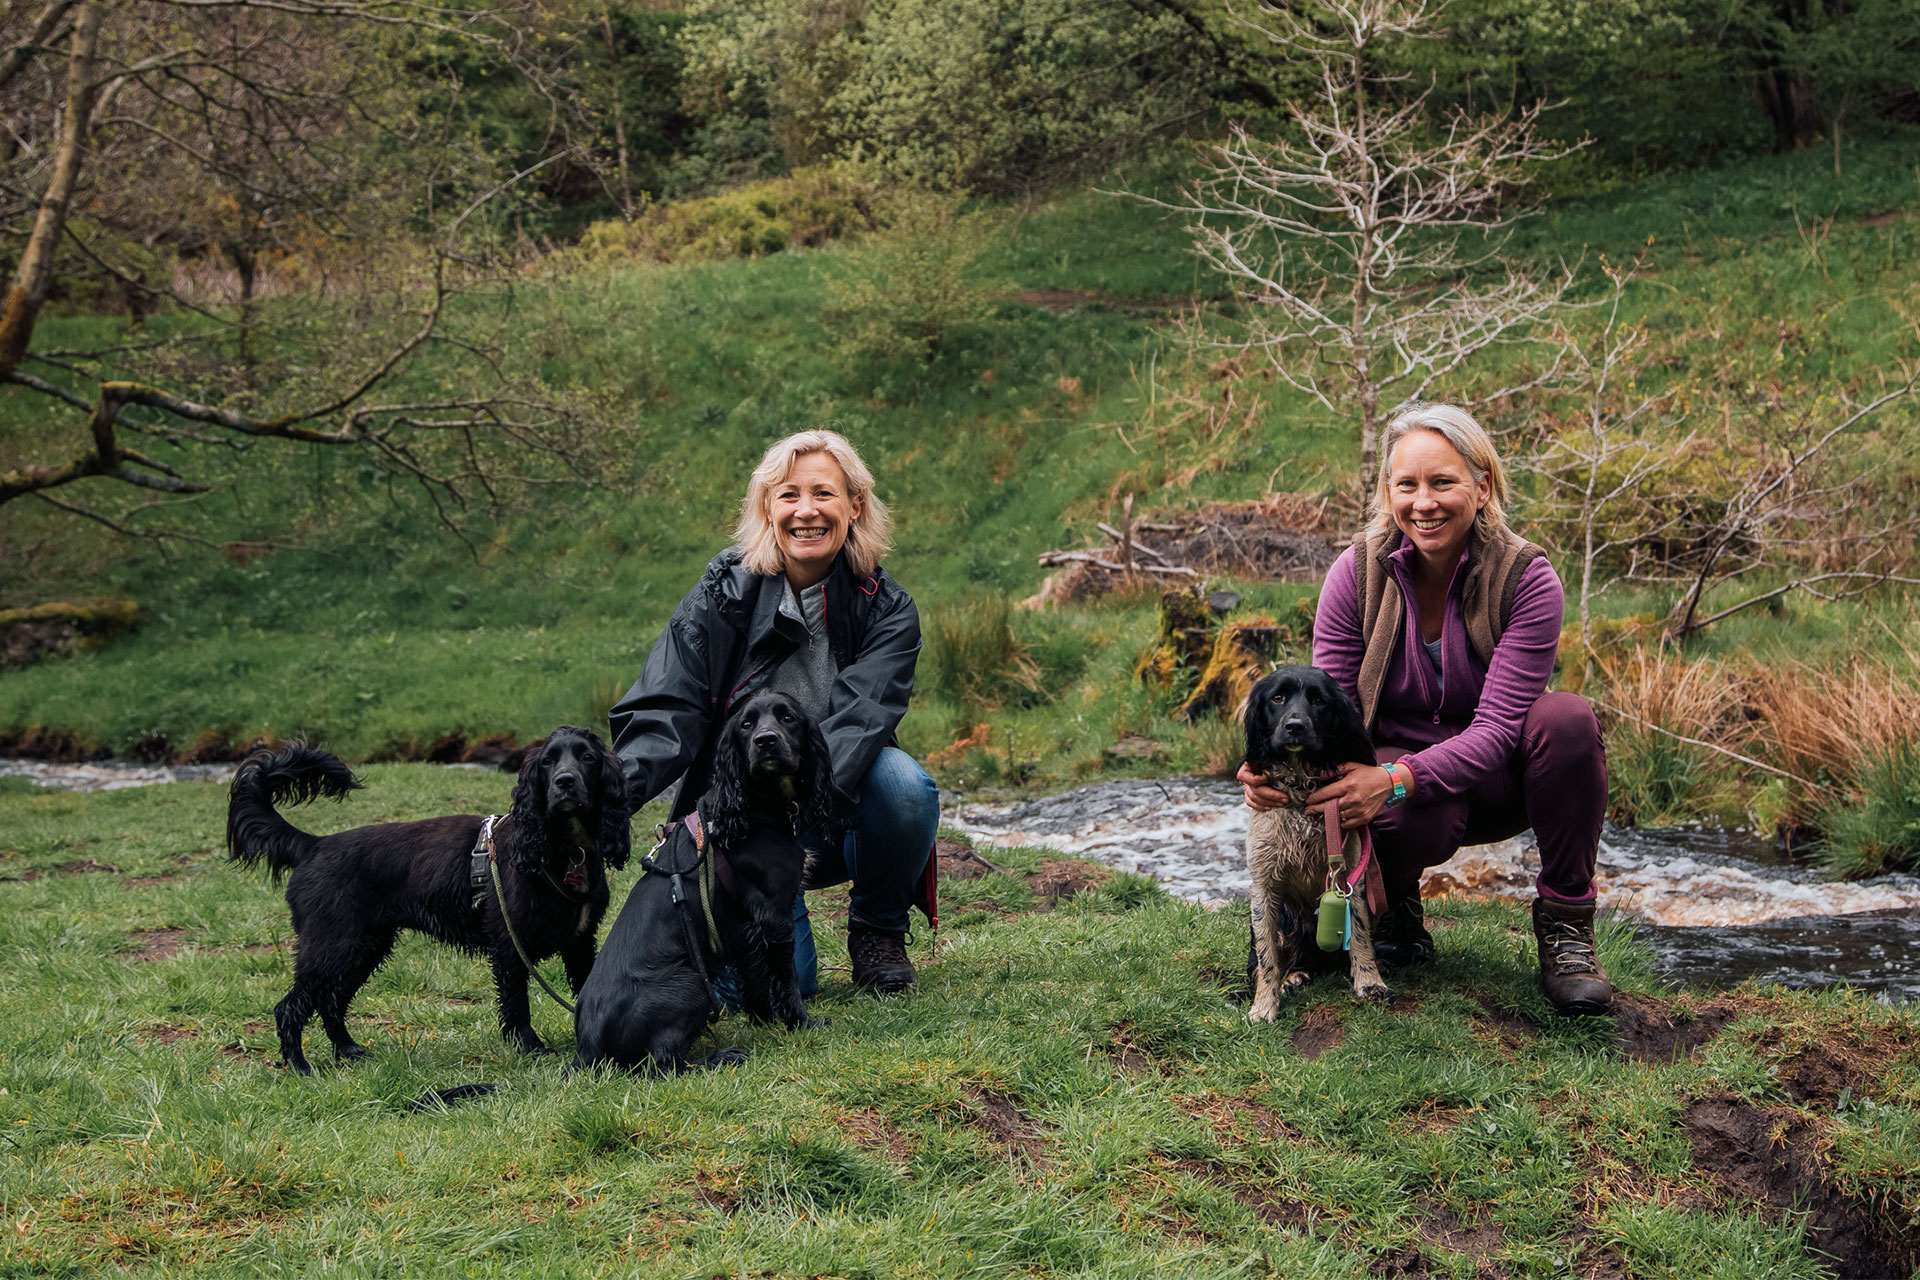 Walkers and their dogs enjoying nature at Wyming Brook, © Helena Dolby